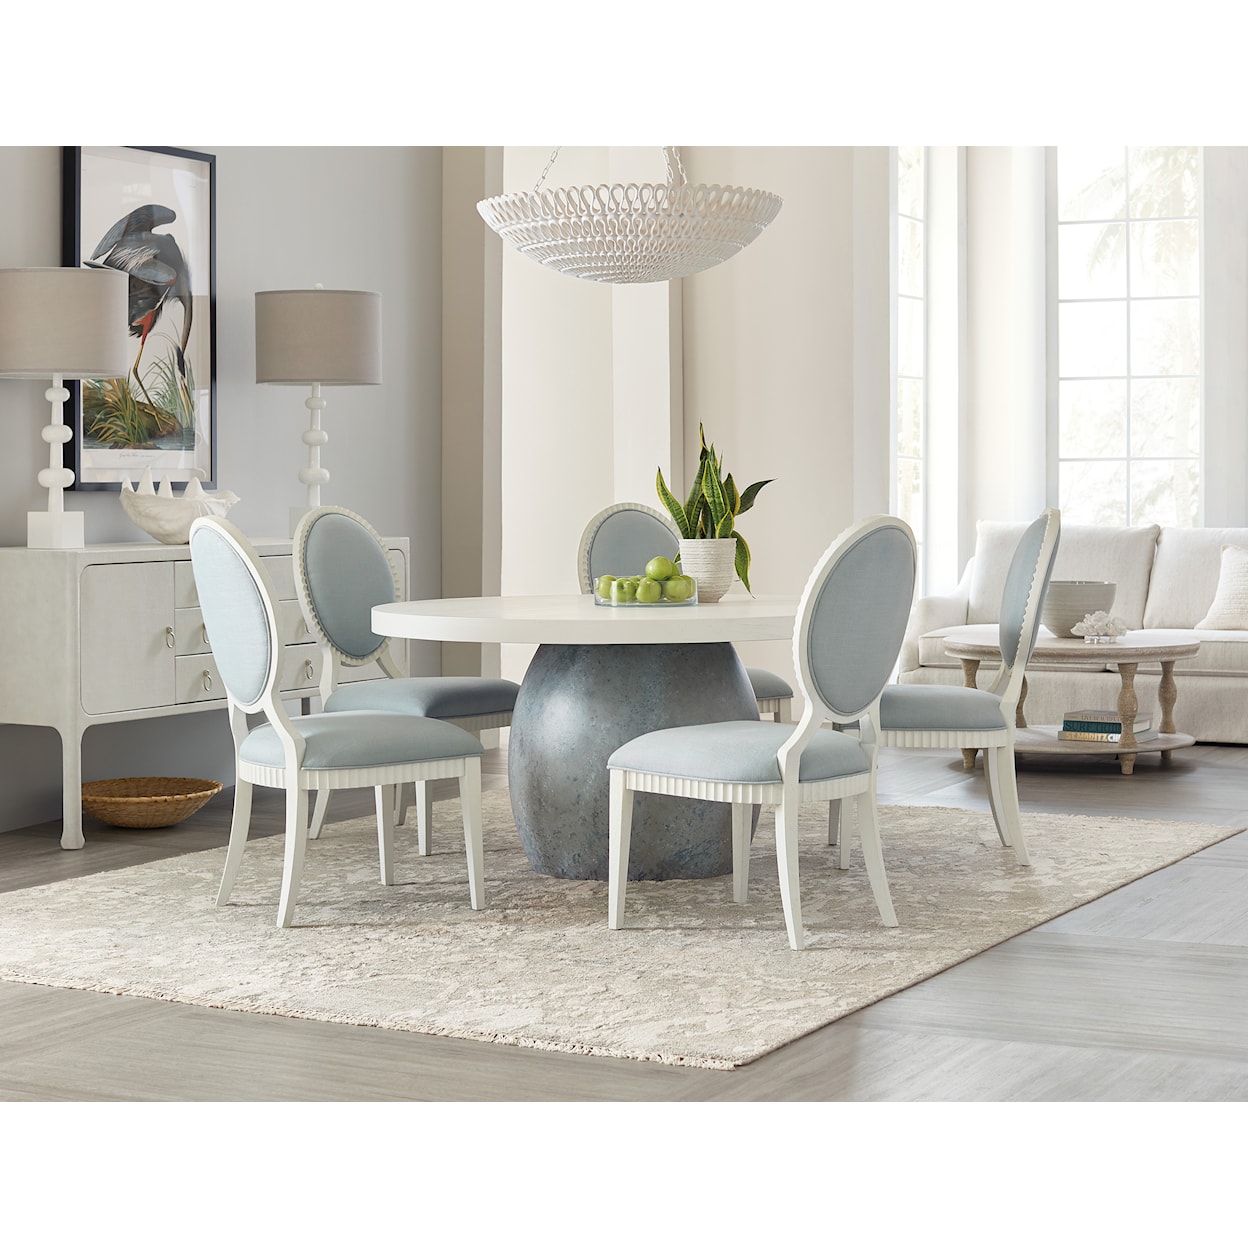 Hooker Furniture Serenity Round Dining Table